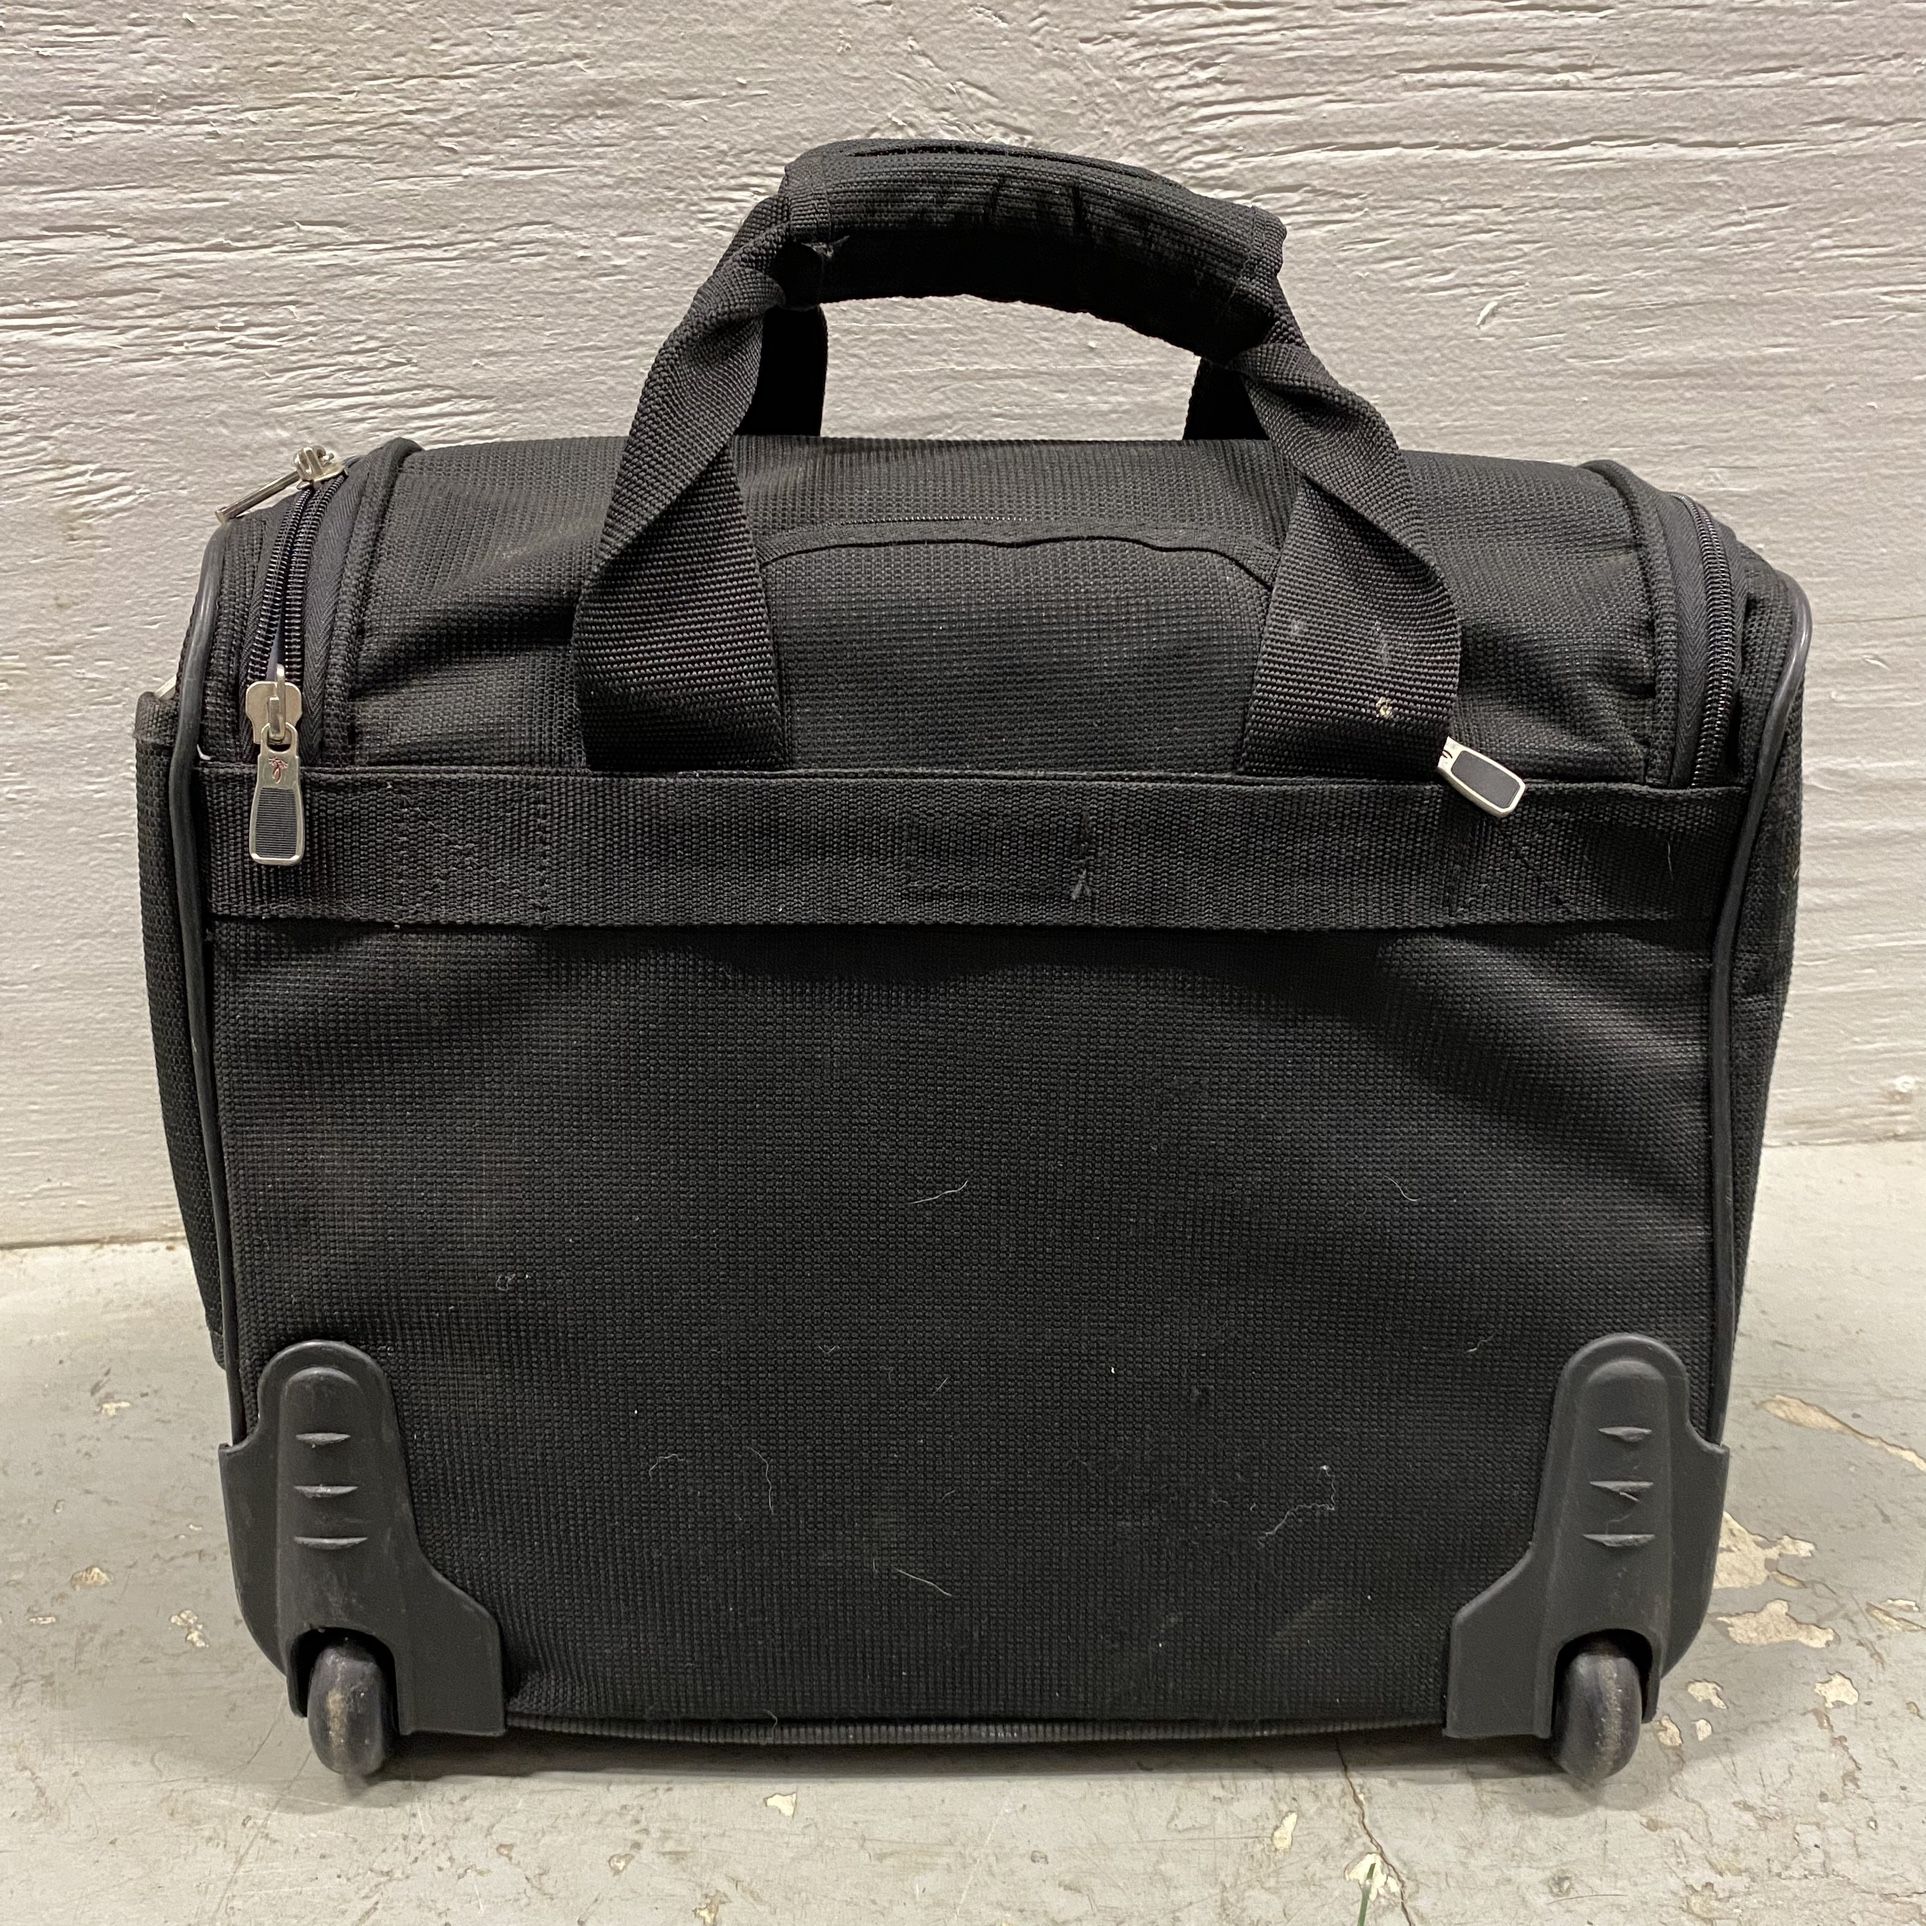  Ricardo Beverly Hills Black Carry-On Personal Item Travel Bag  Great pre-owned condition.   Measurements:  16” Wide x 13 1/2” Tall x 10” Deep  Pick u